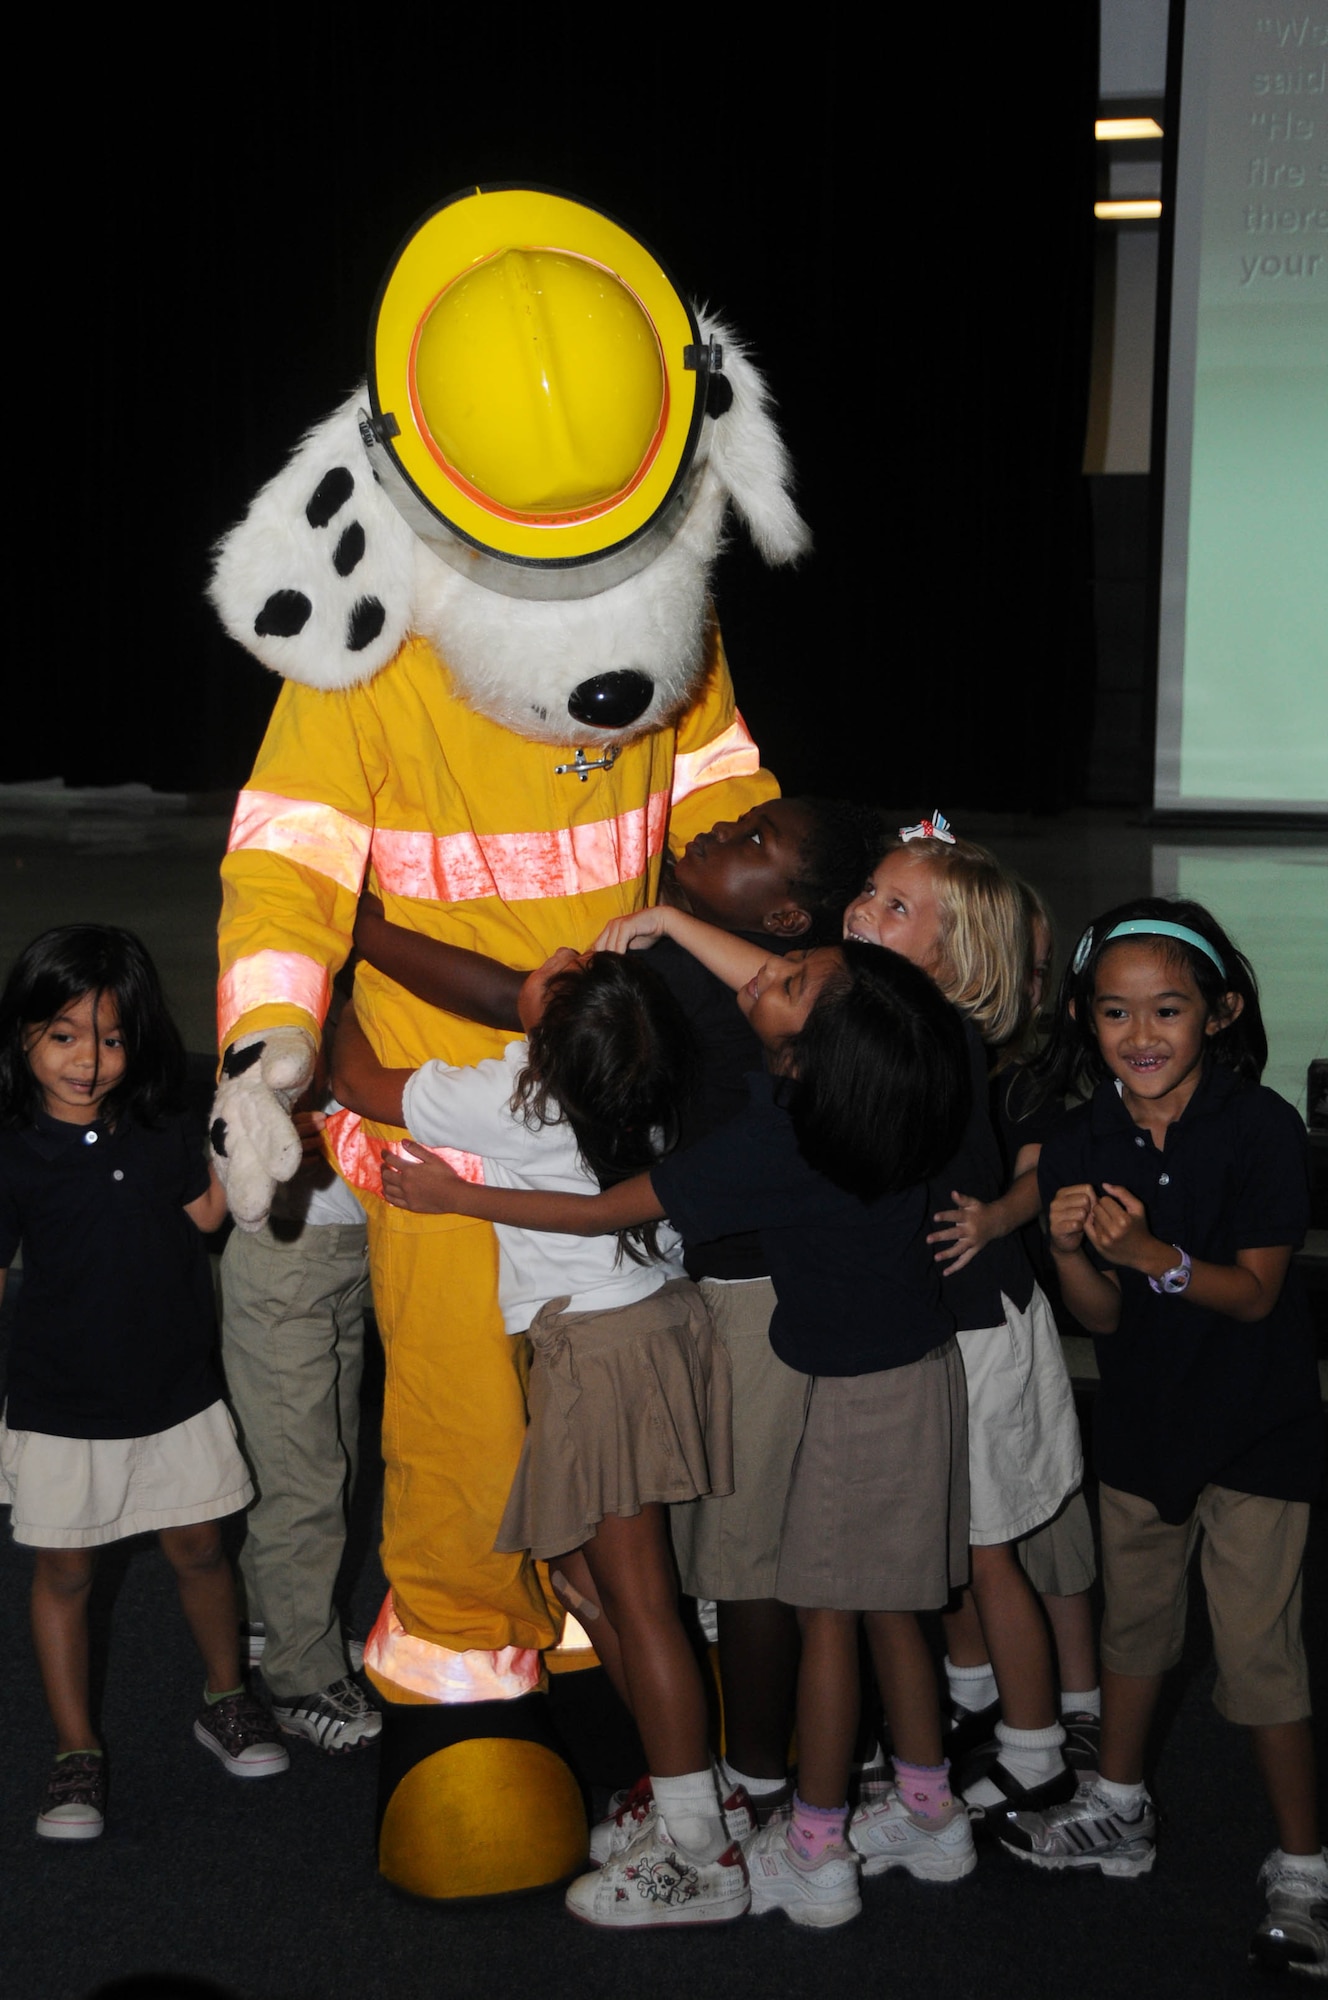 ANDERSEN AIR FORCE BASE, Guam - Airman Colton Balthazor, 36th Civil Engineer Squadron firefighter, receives smiles and big hugs from Andersen's Elementary School students during Fire Prevention Week here Oct. 9. The character "Scruffy" is used to entertain and inform children on the importance of fire safety. (U.S. Air Force photo by Senior Airman Sonya Croston)